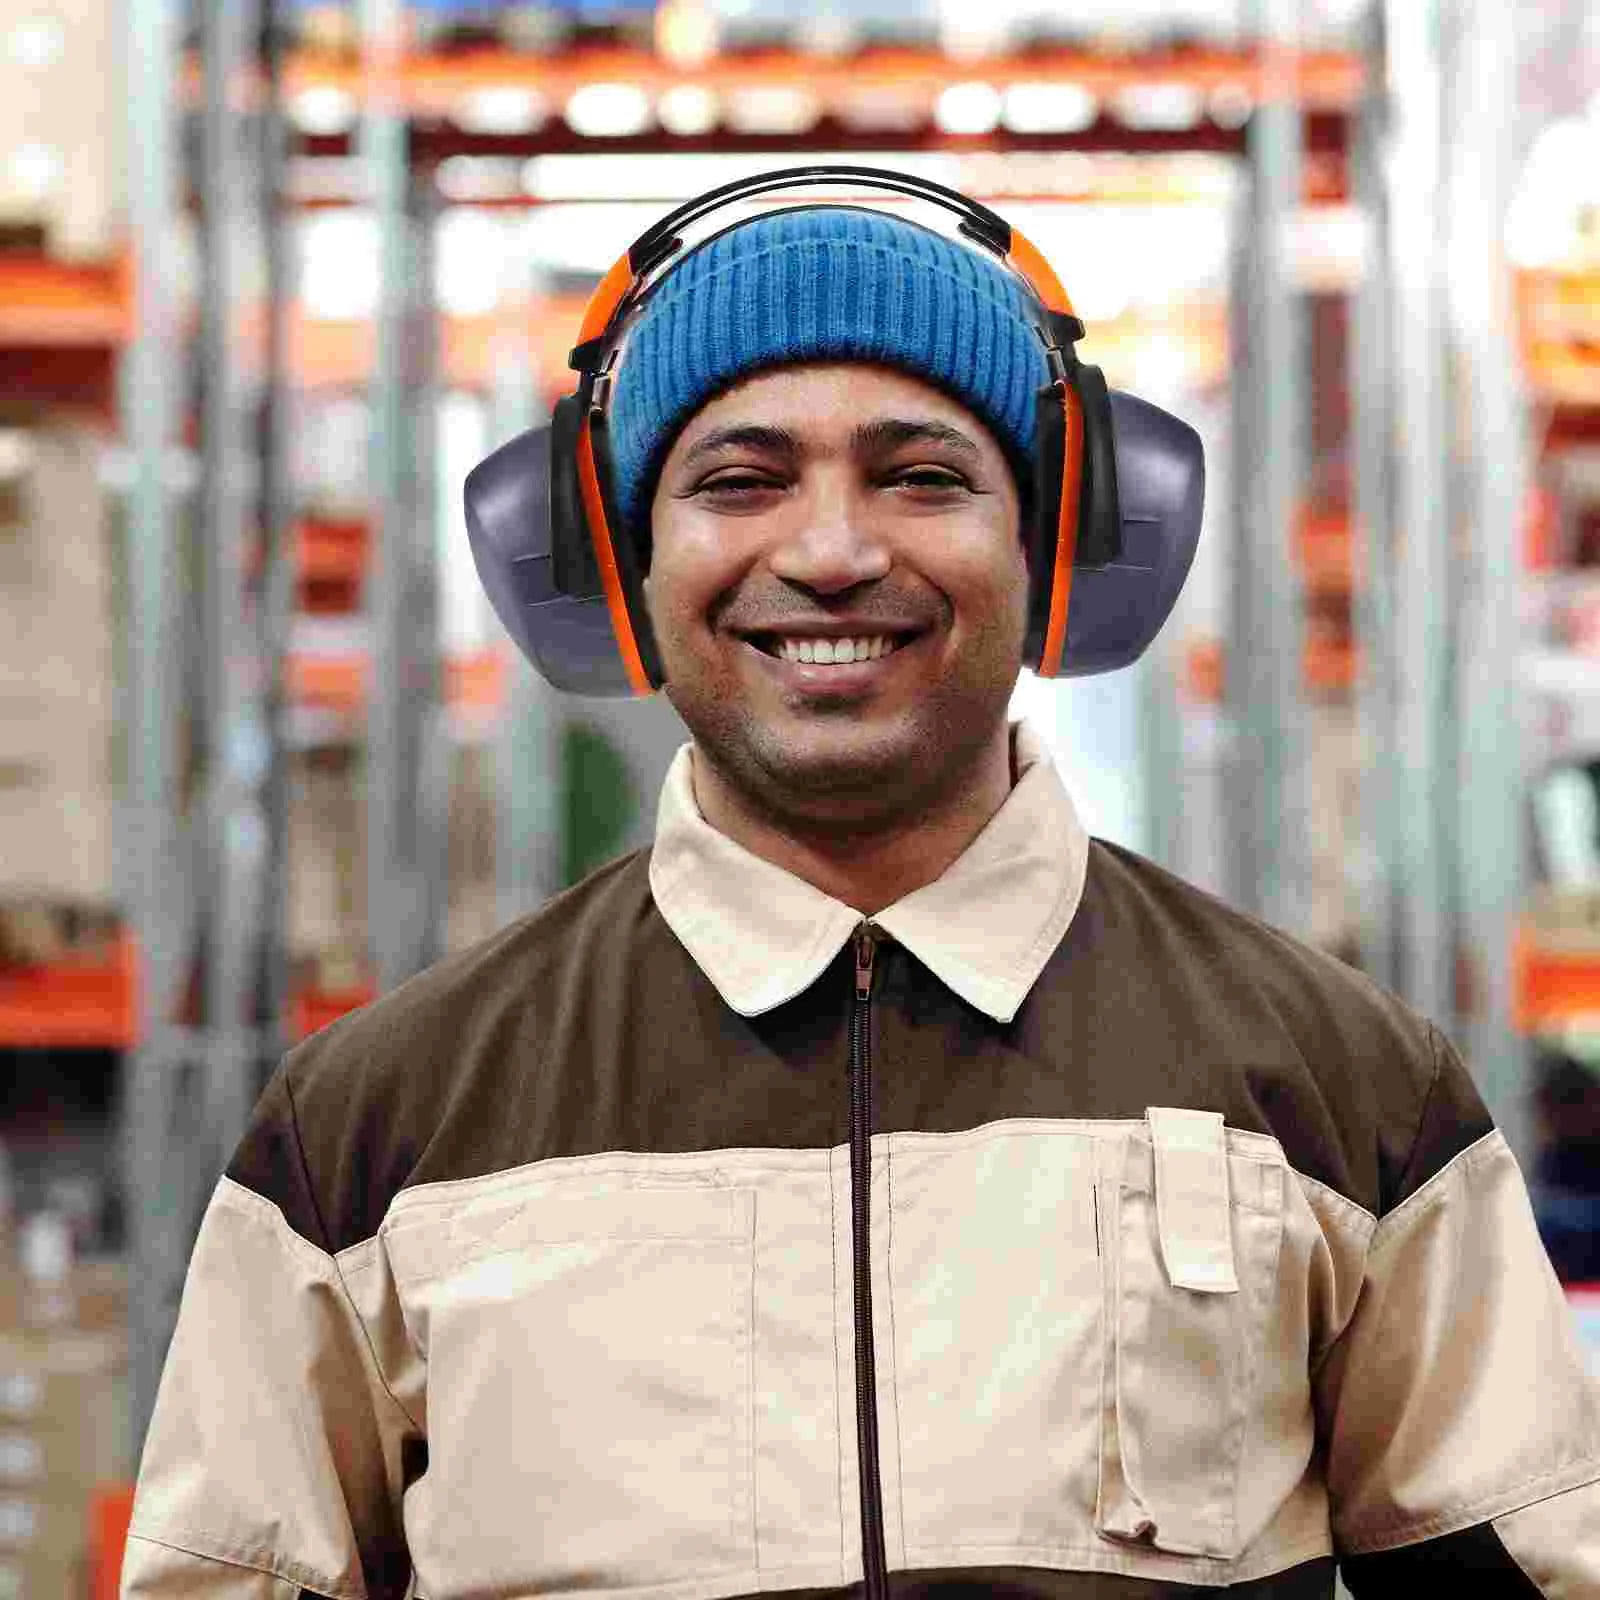 Noise Reduction Earmuff Hearing Protection Earmuff Ear Protection Earmuff For Workshop Sound-Proof Noise Reduction Ear Cover